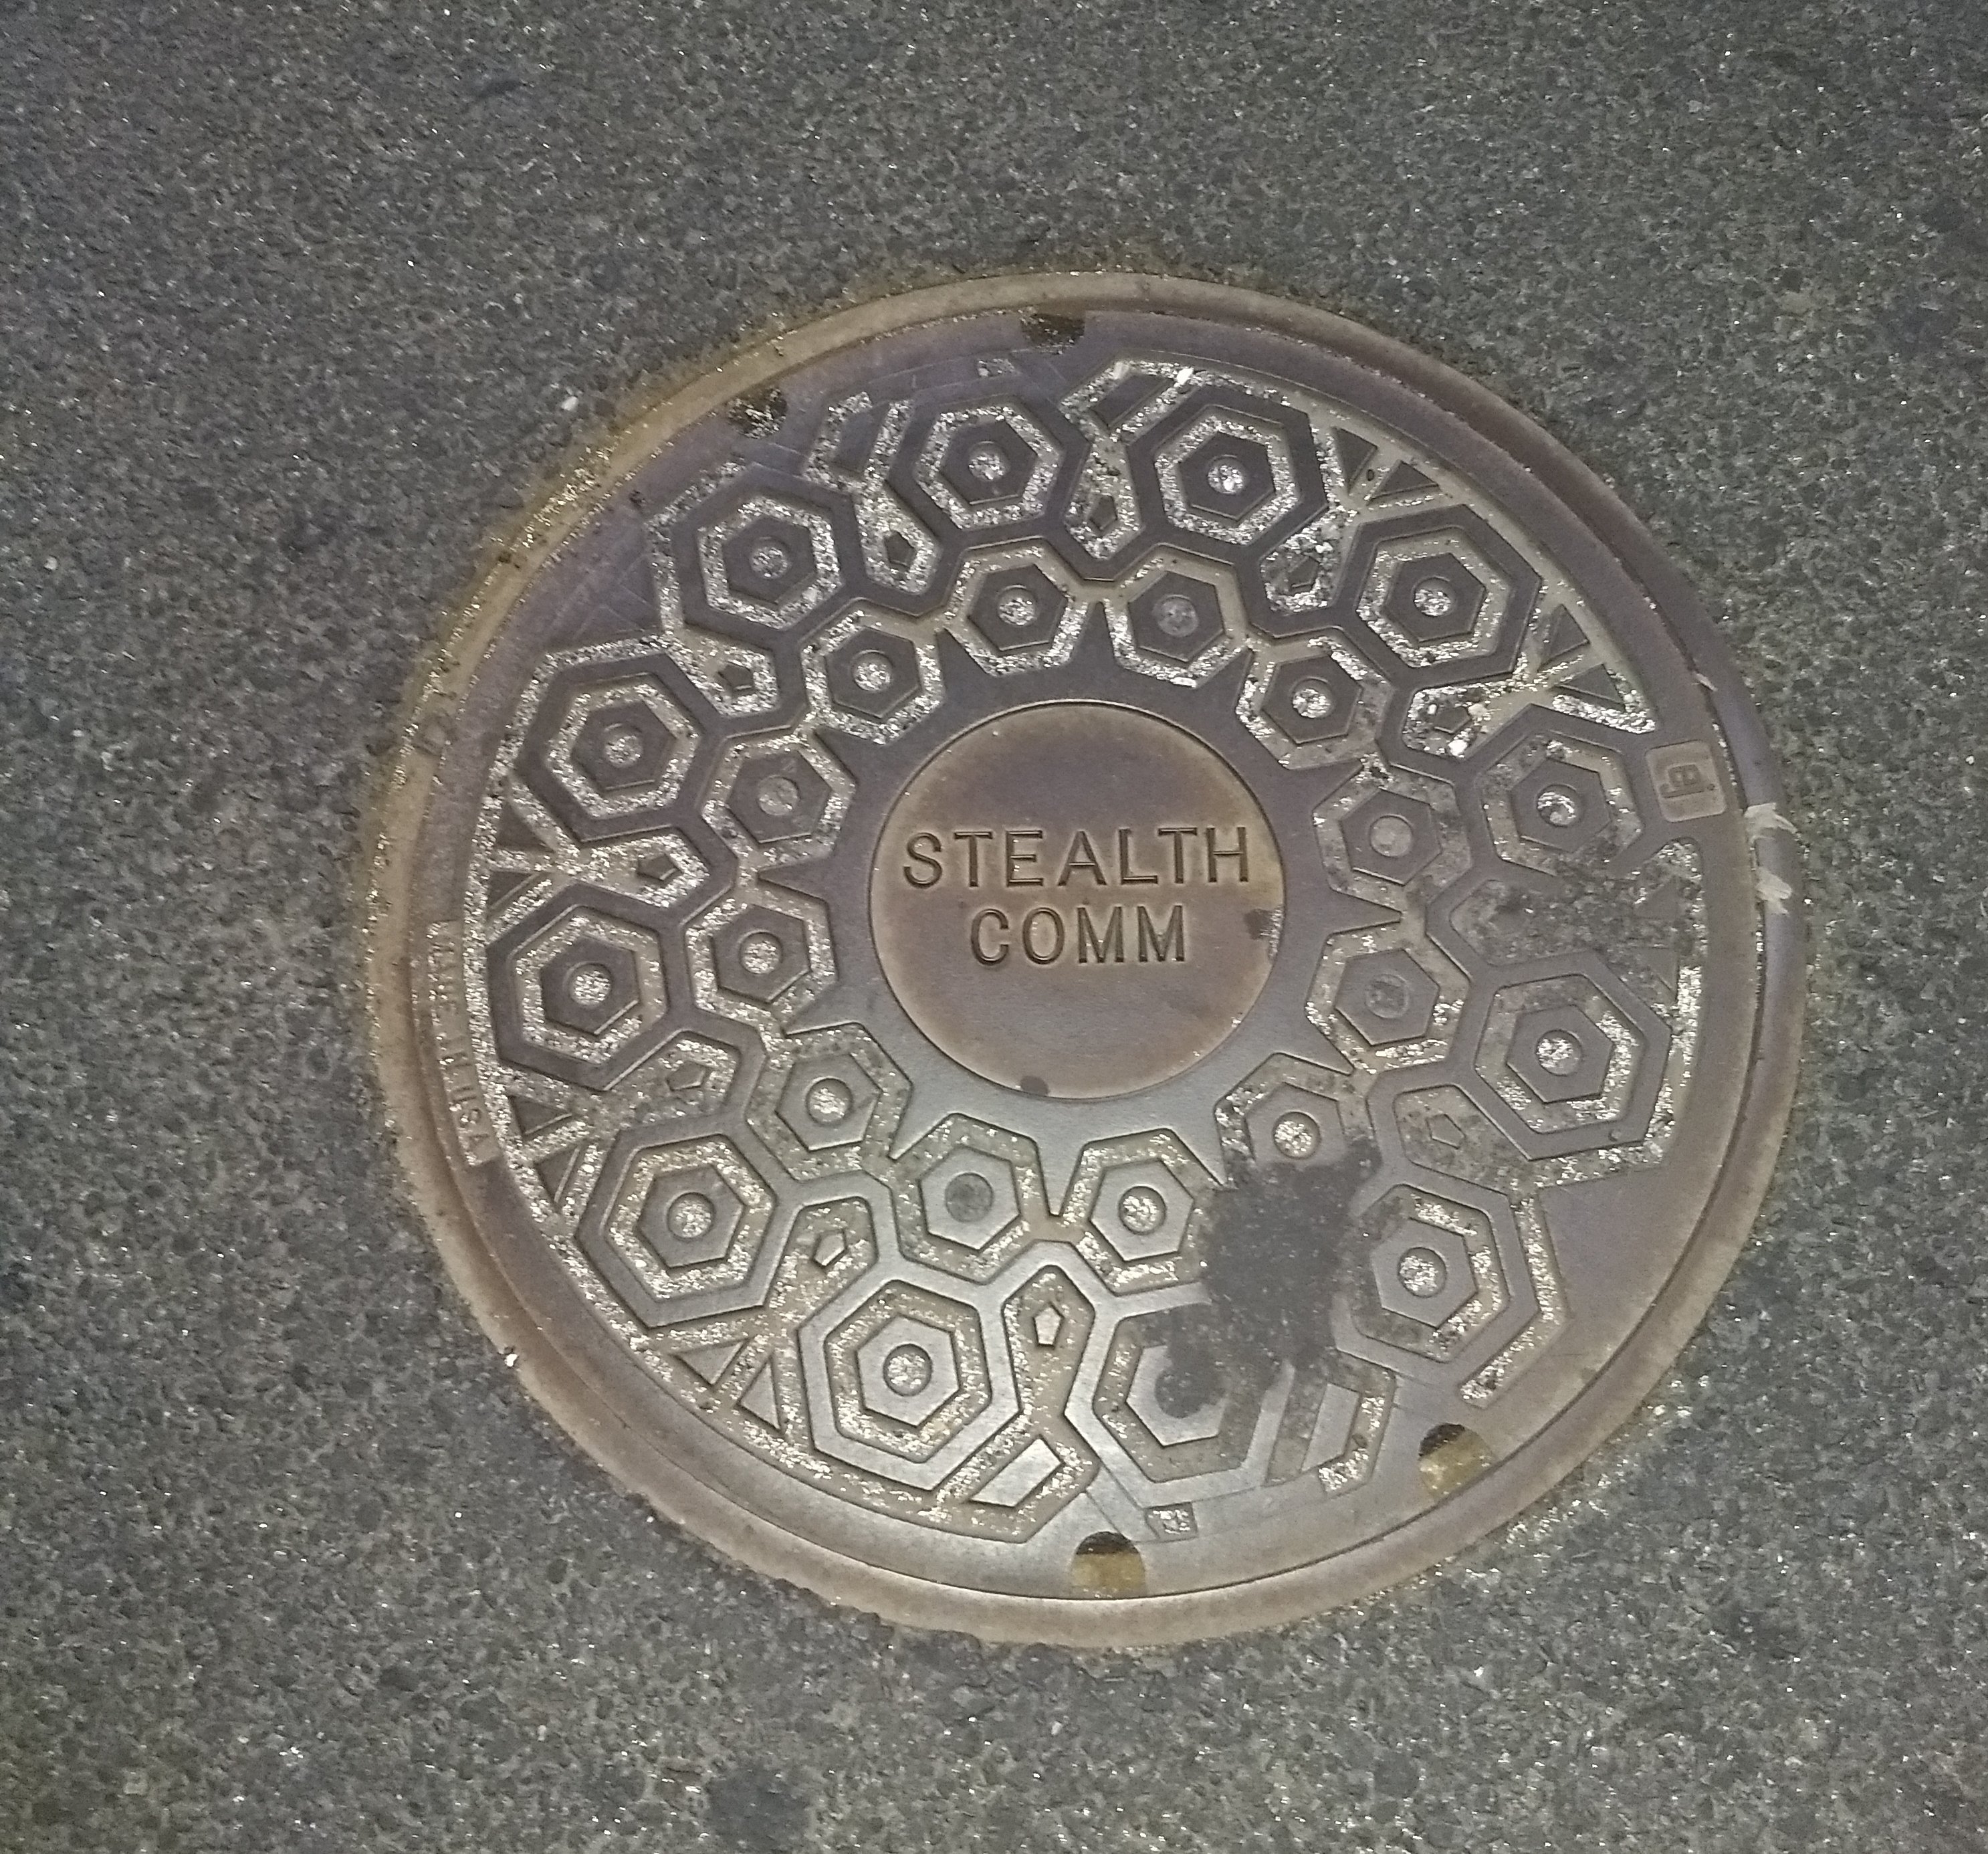 Stealth_Fiber-Optic_Manhole_Cover_in_NYC